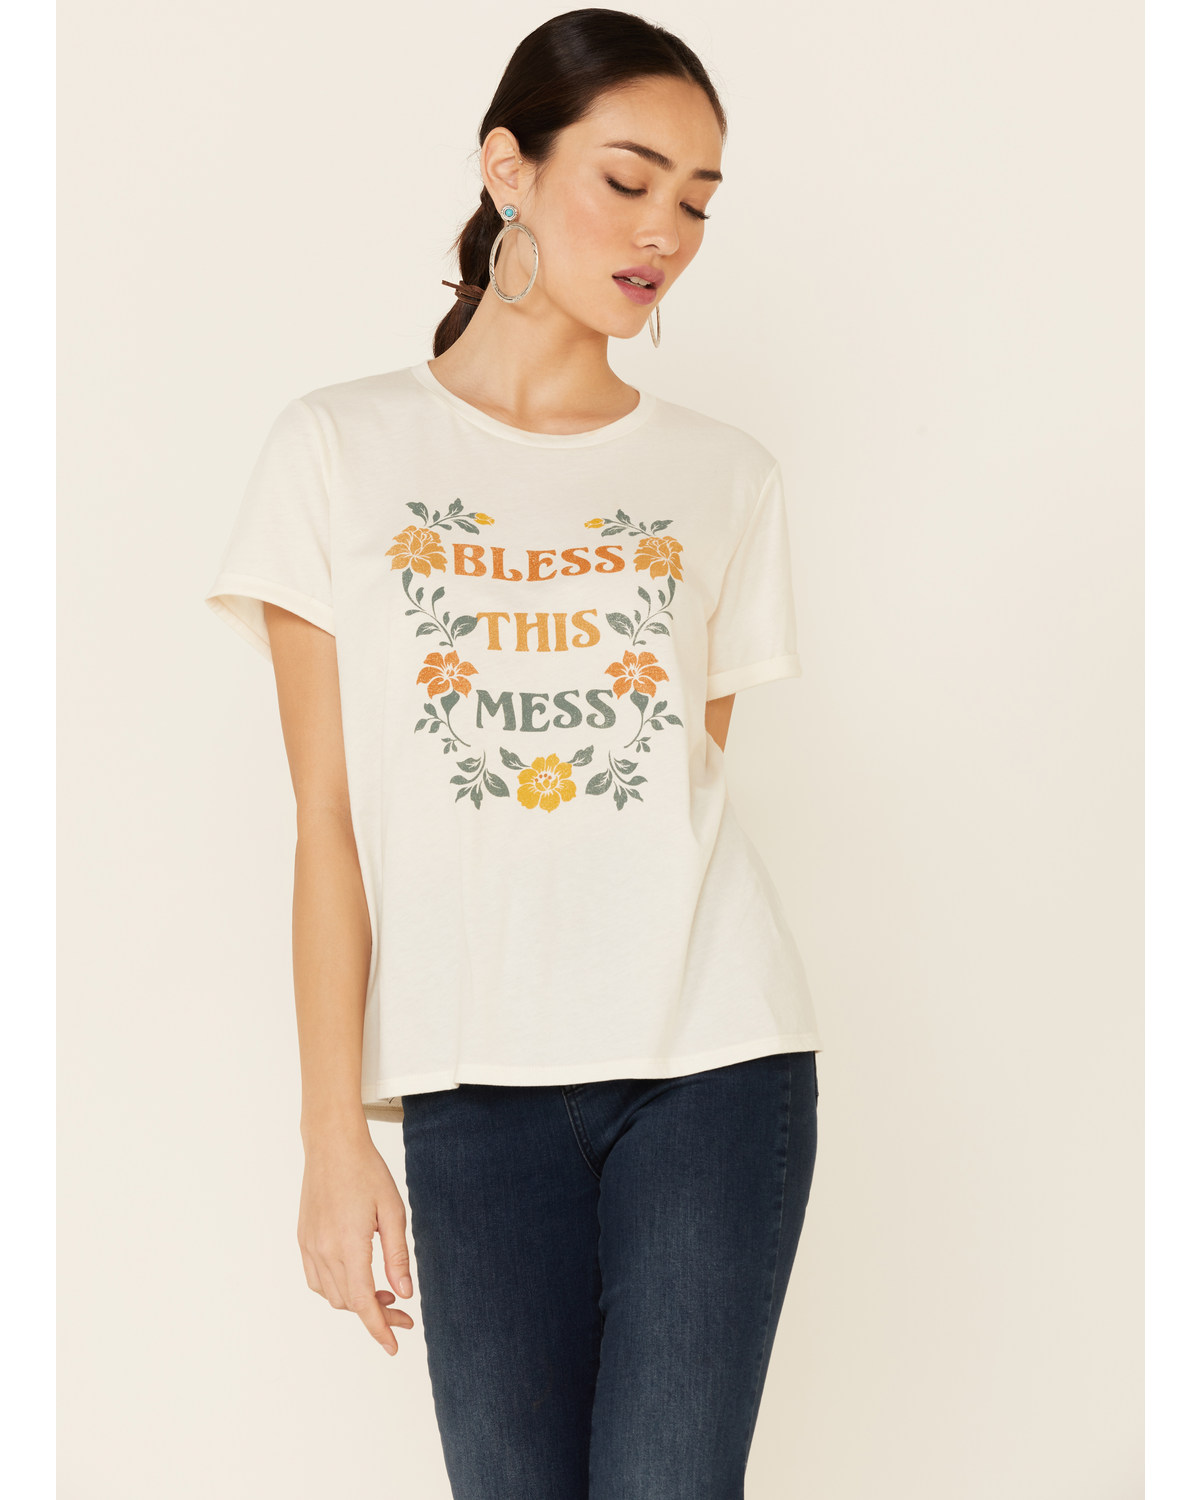 Cut & Paste Women's Bless This Mess Floral Graphic Short Sleeve Tee